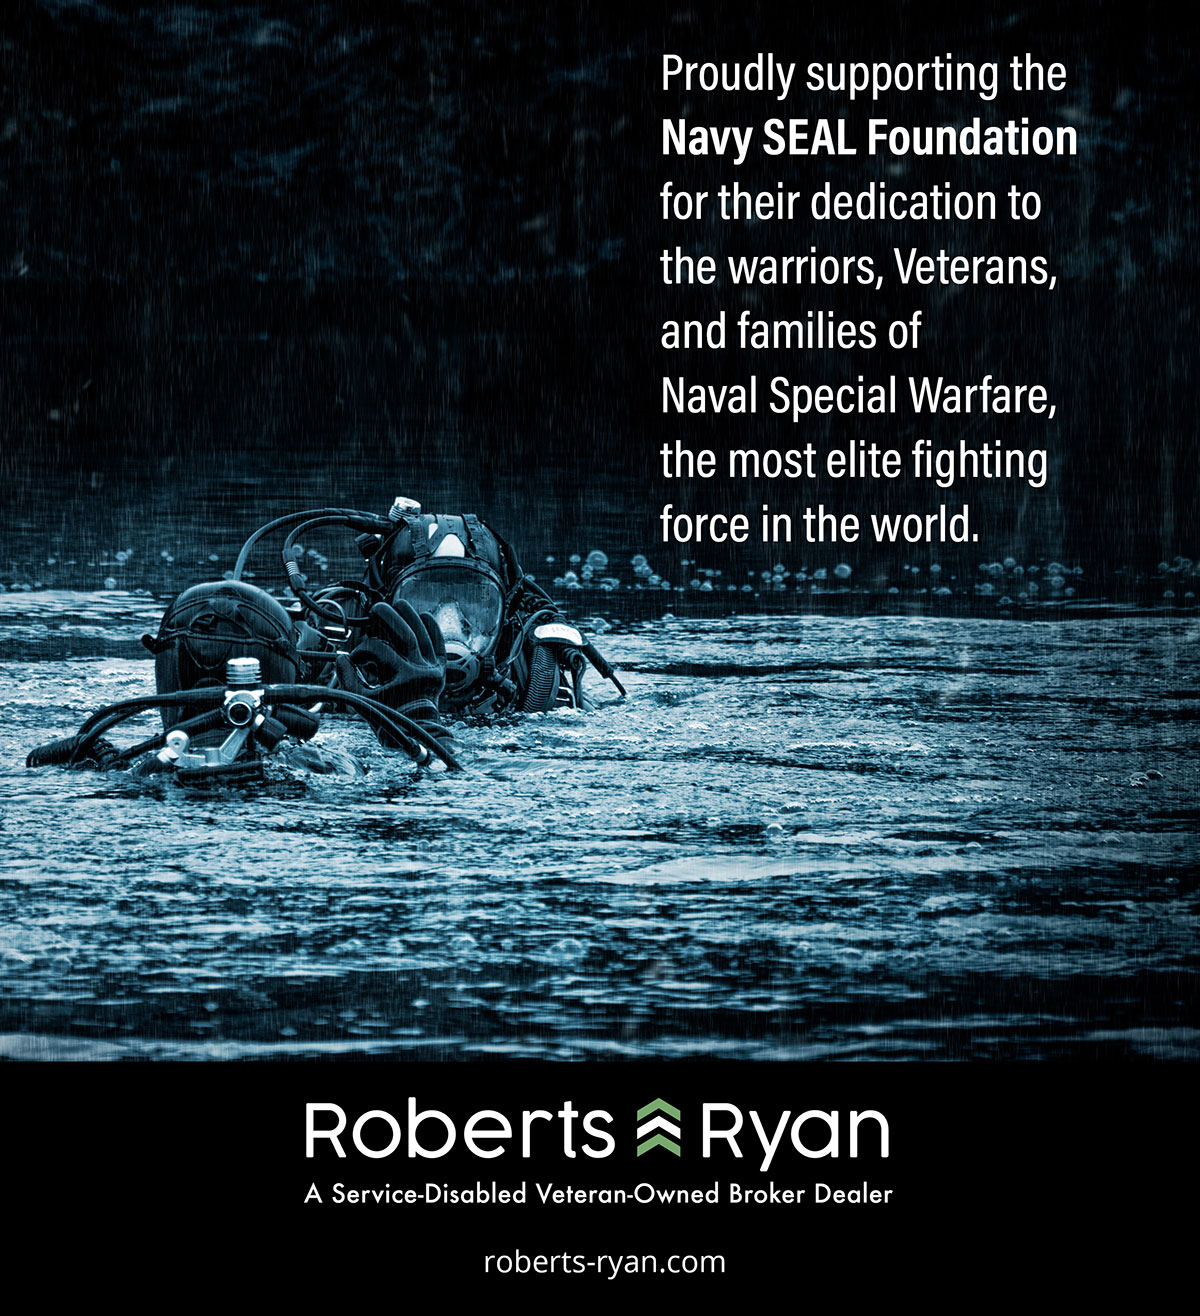 Navy SEAL Foundation ad with two Navy SEALS emerging from the water at night